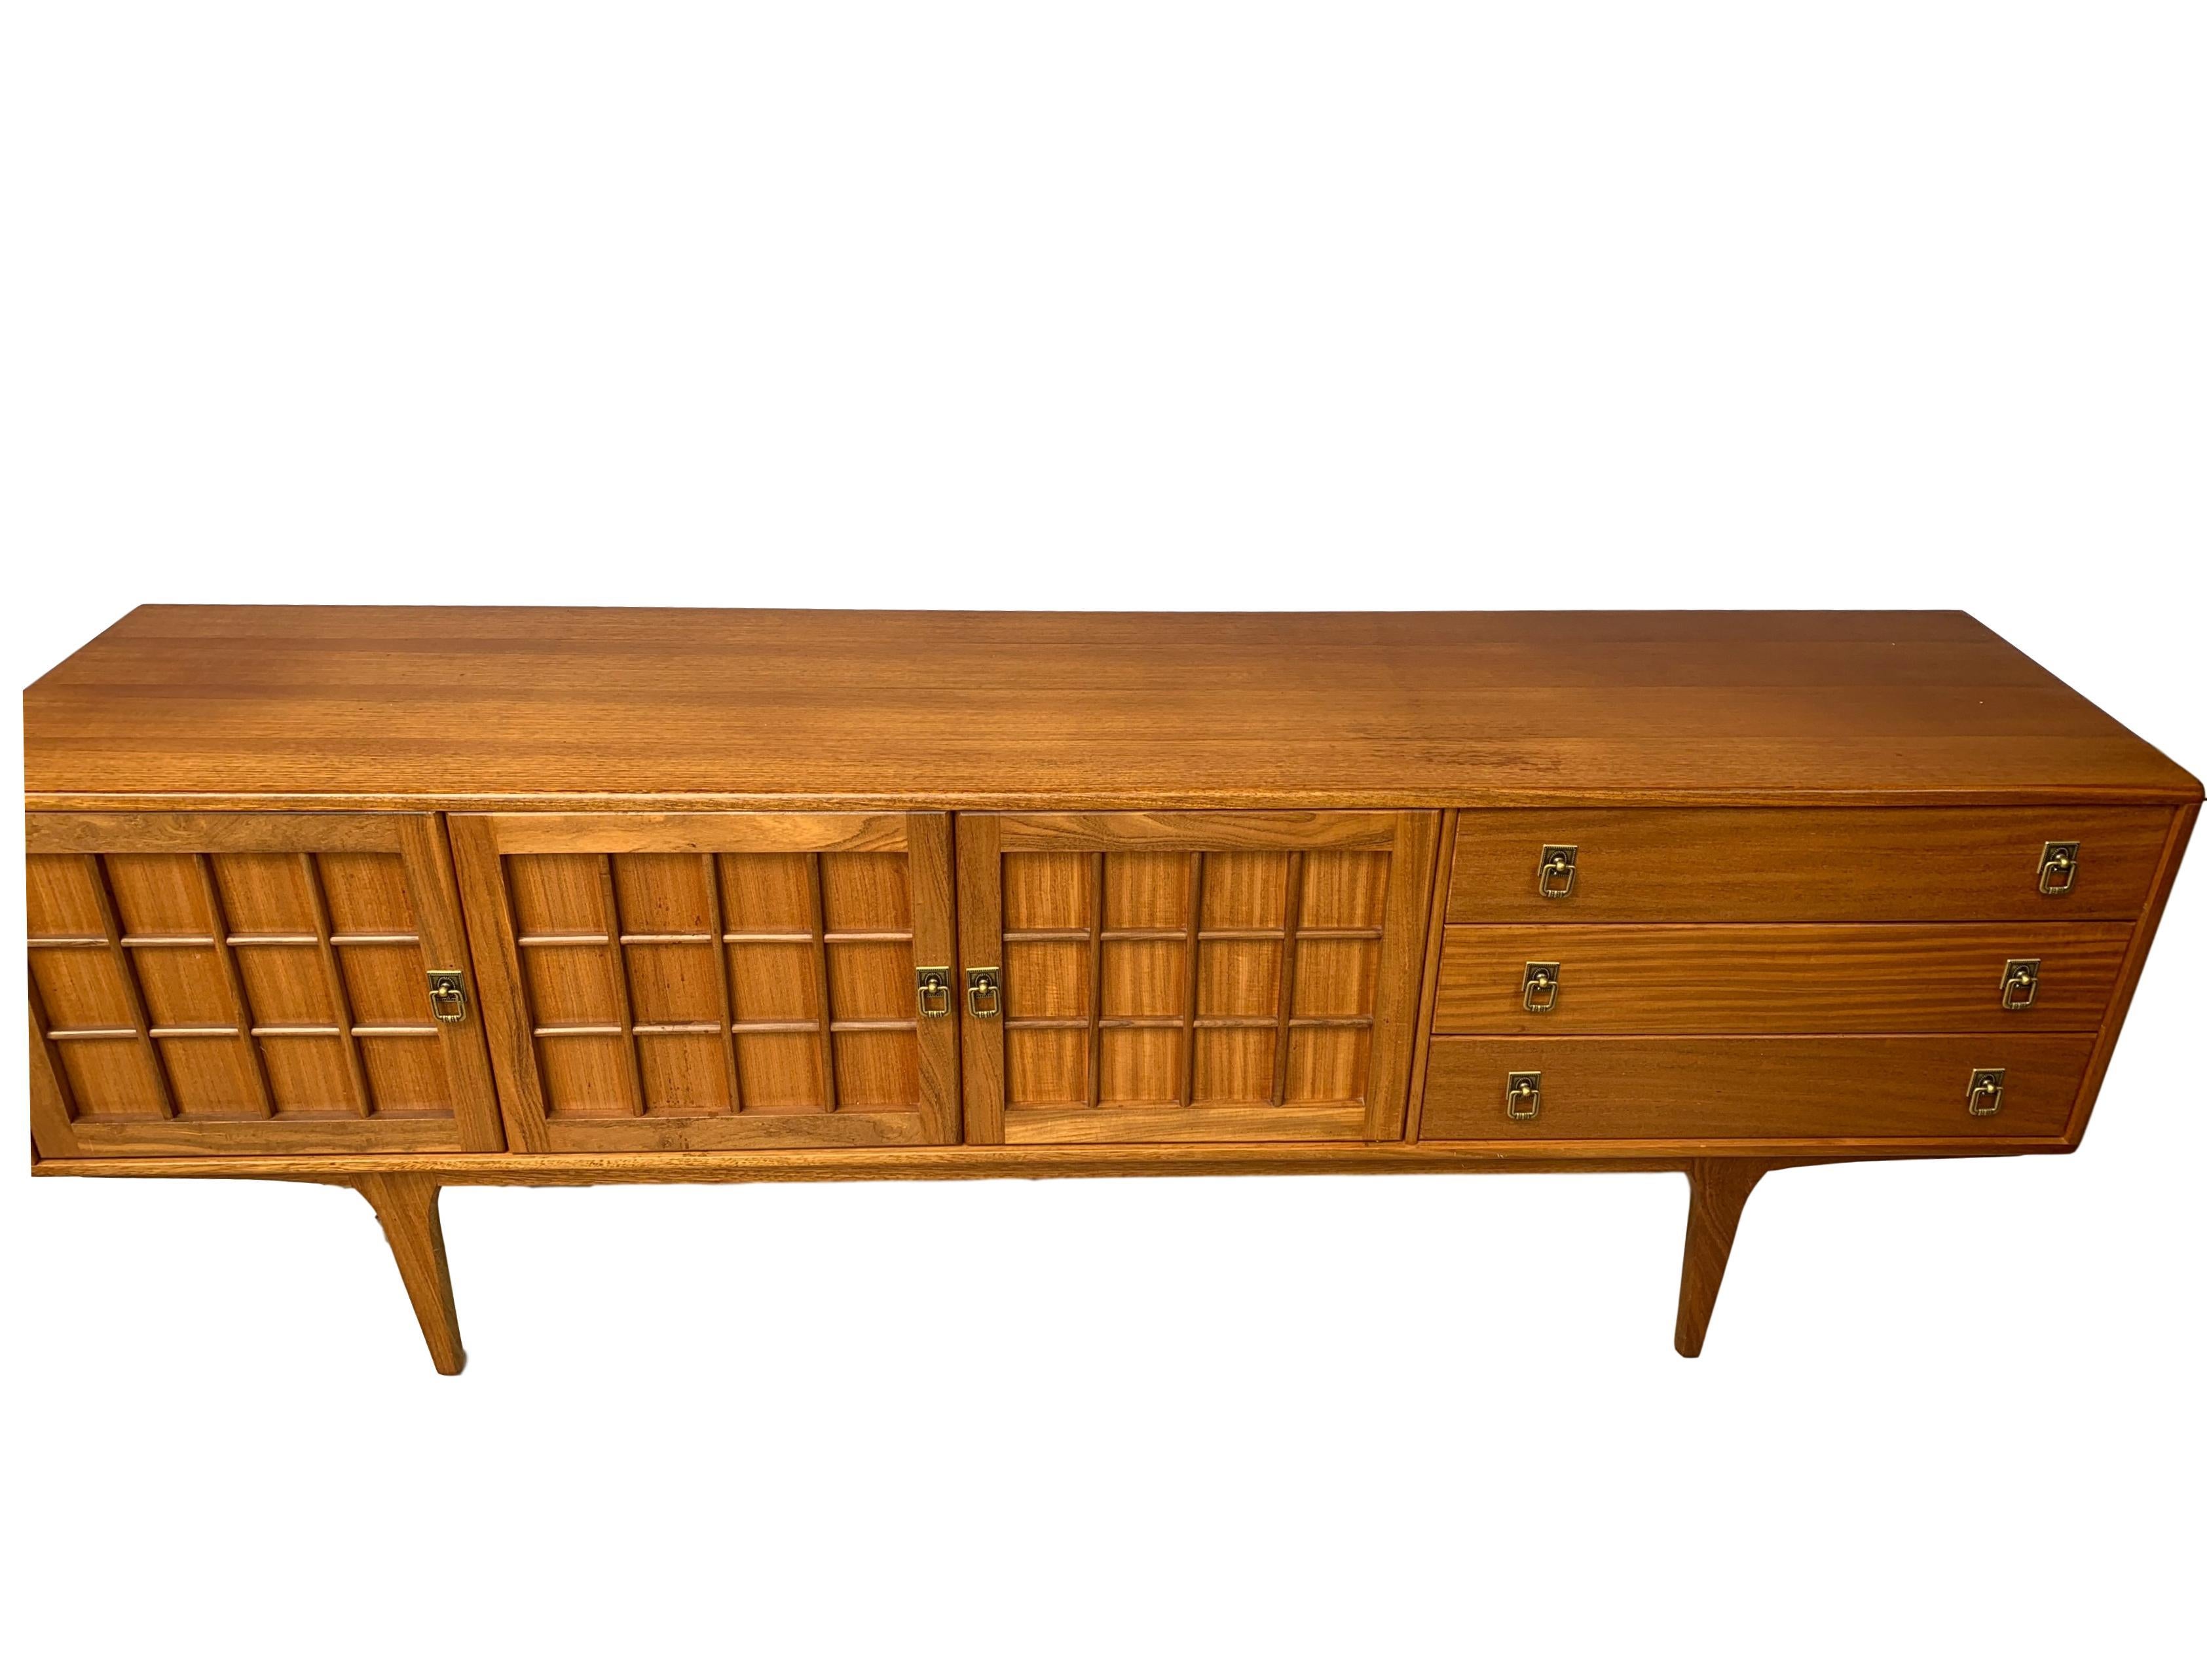 Mid-Century Modern sideboard credenza, teak, English, circa 1965, with molded raised panels, abundant storage space, and fitted silver drawer. Solid construction and built to the highest standard; you'll find no finer furniture